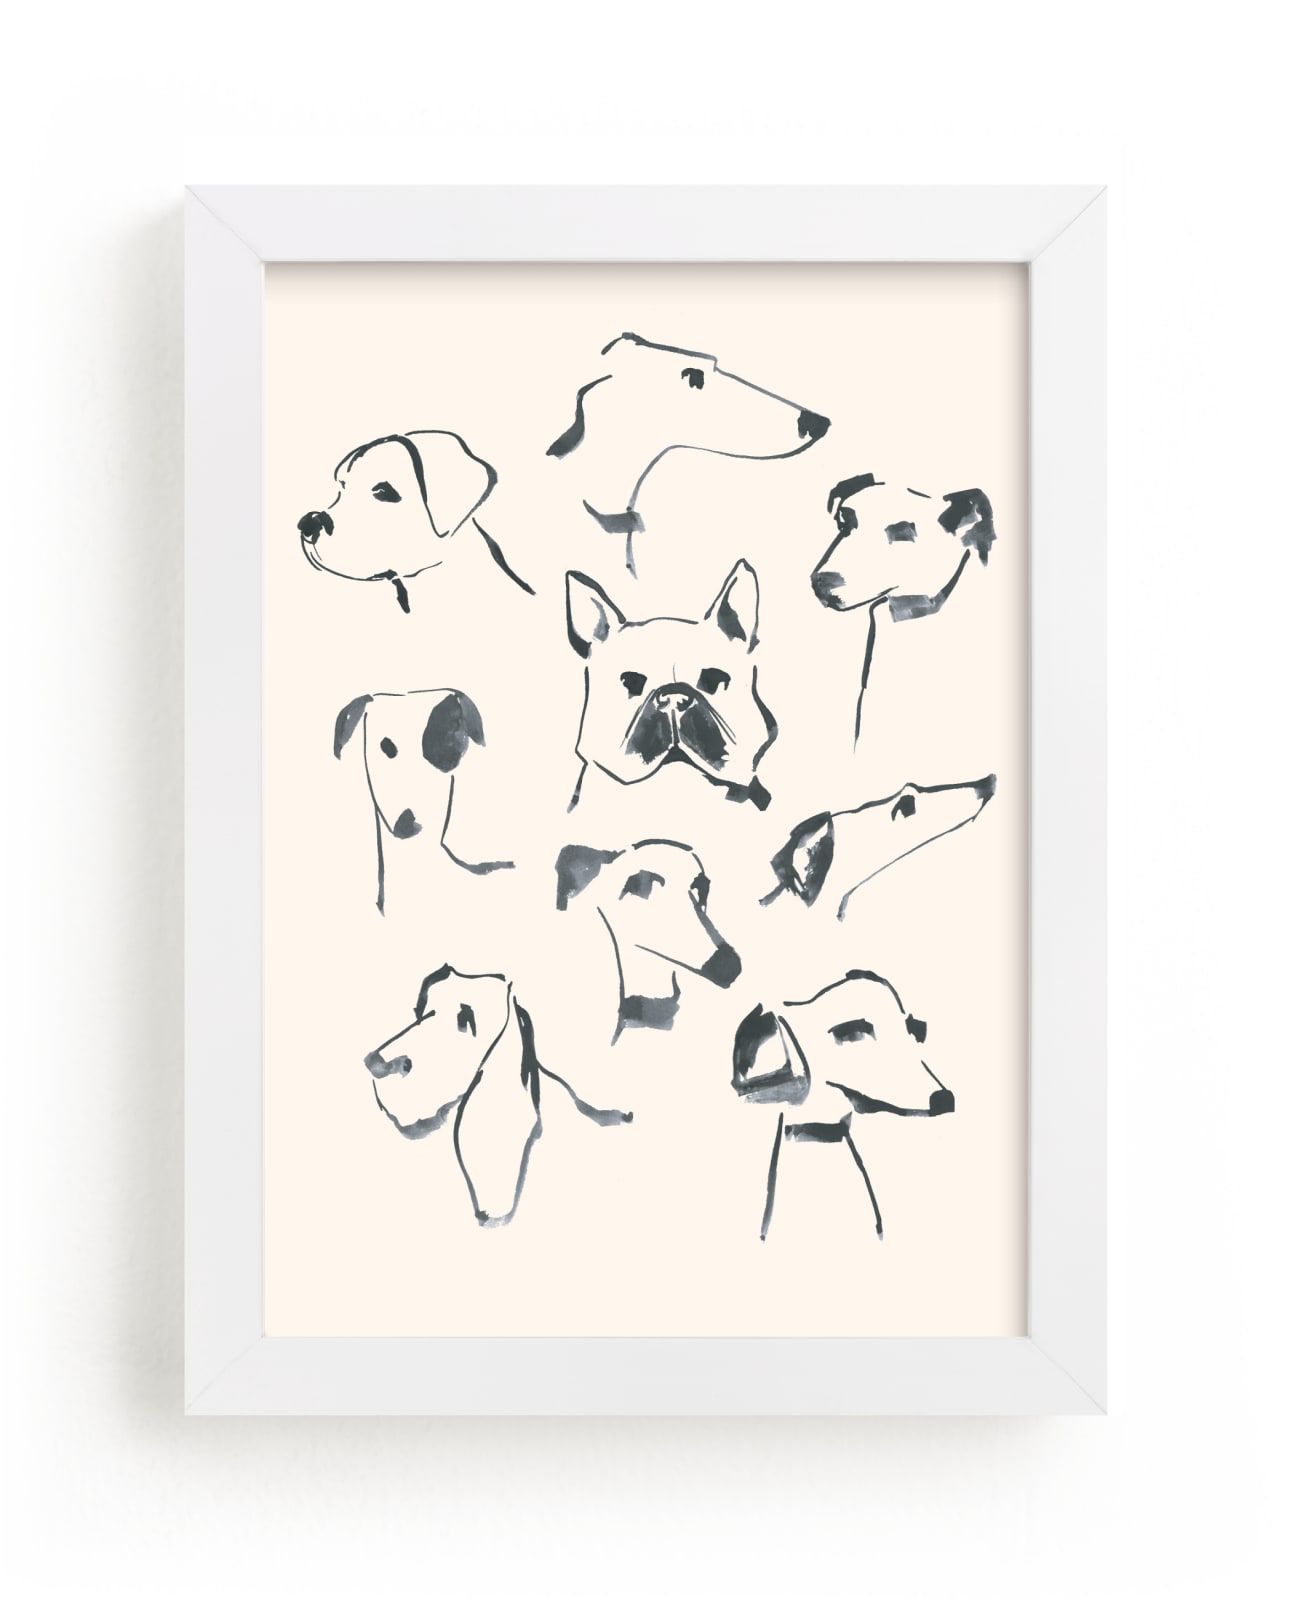 "Dog study" - Open Edition Children's Art Print by Teju Reval. | Minted